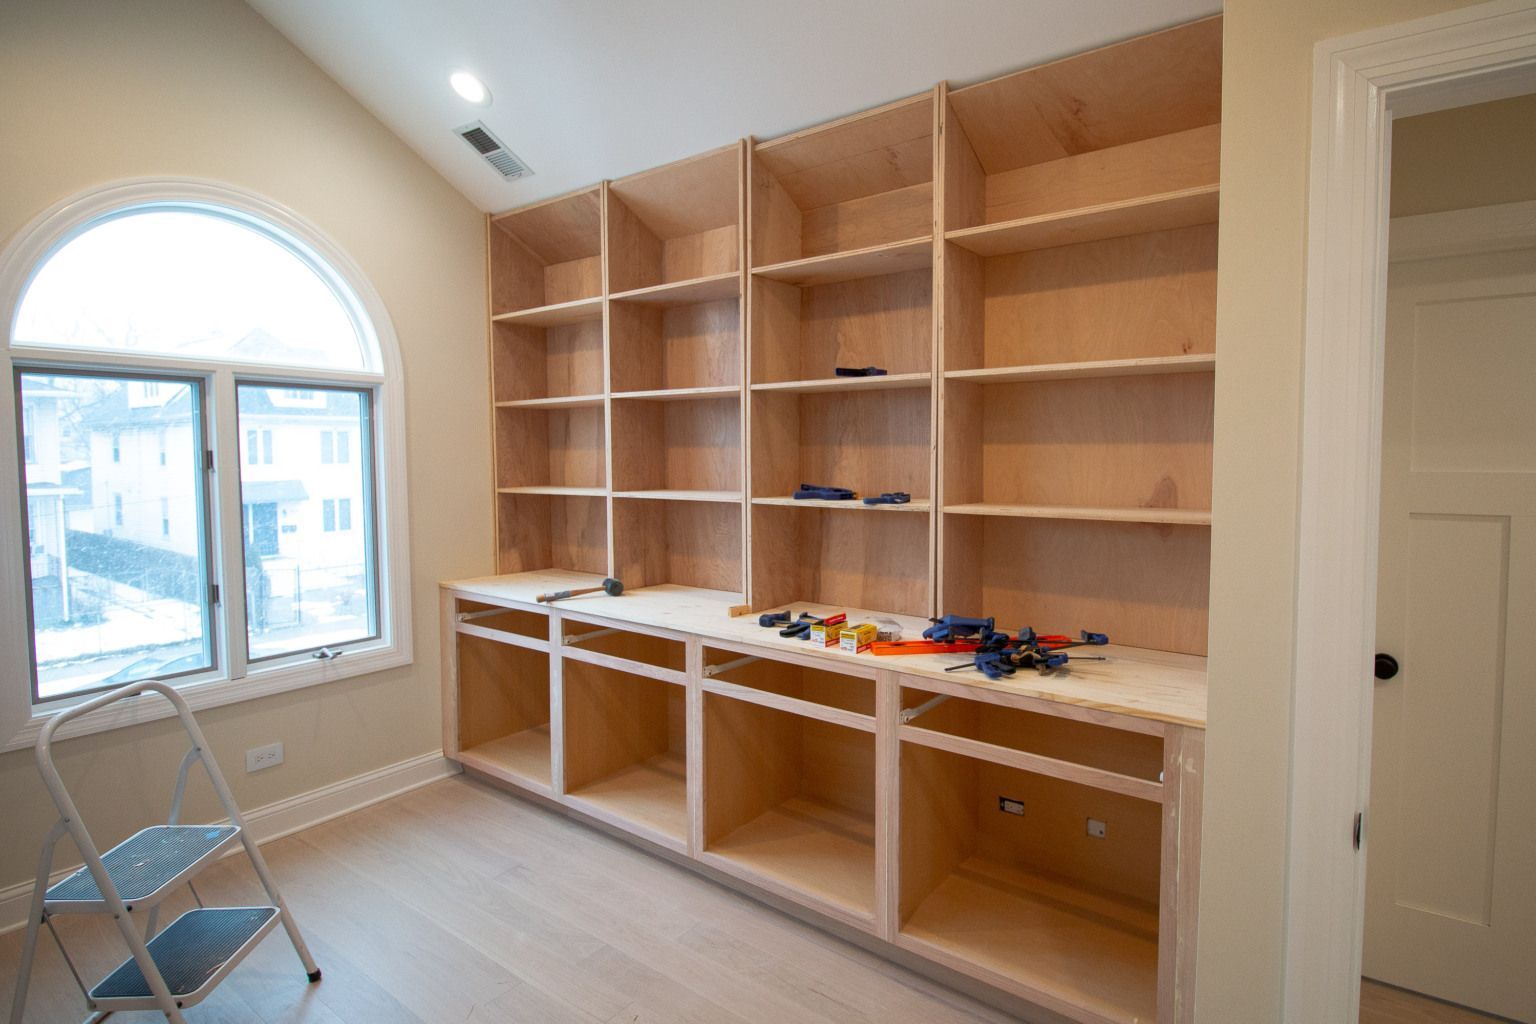 How to Build DIY Bookshelves for Built-Ins | The DIY Playbook -   diy Shelves bookshelves